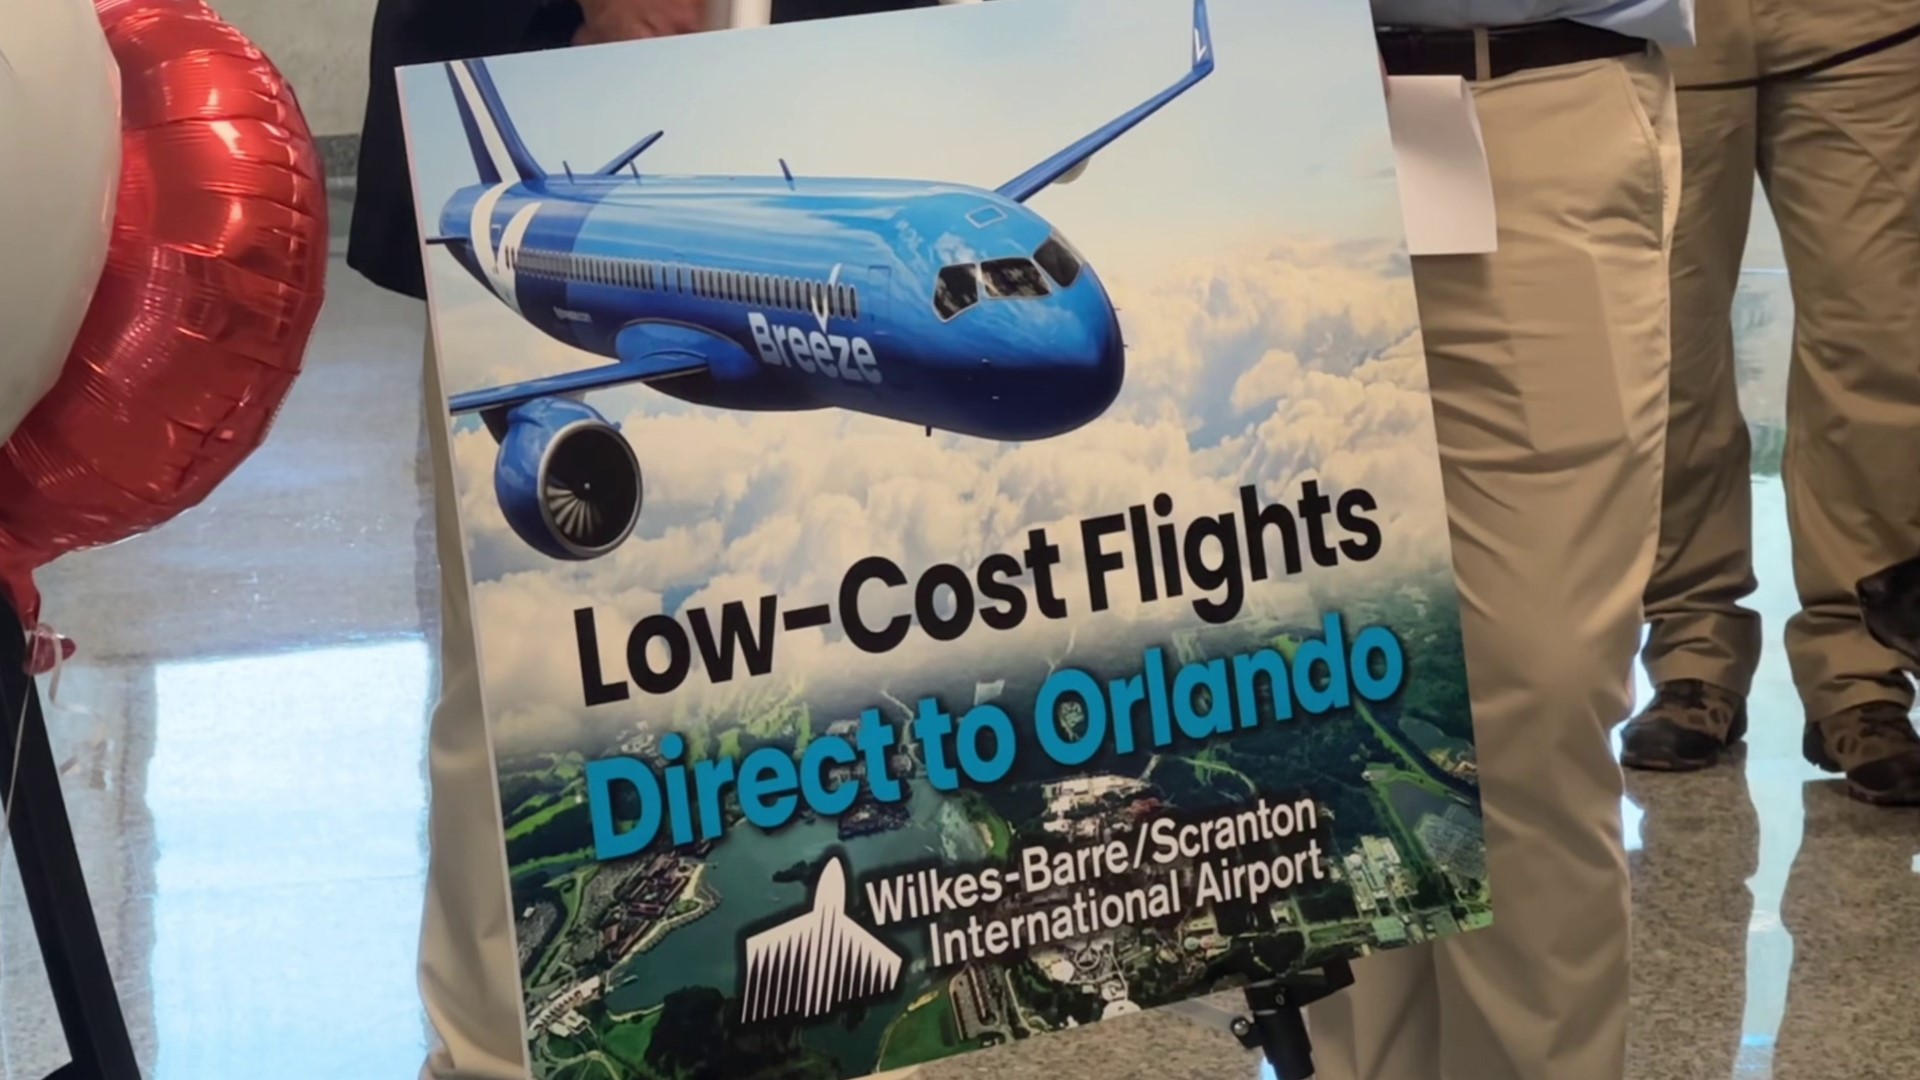 Breeze Airways has announced the start of direct flights to Orlando from Avoca, beginning in 2024.